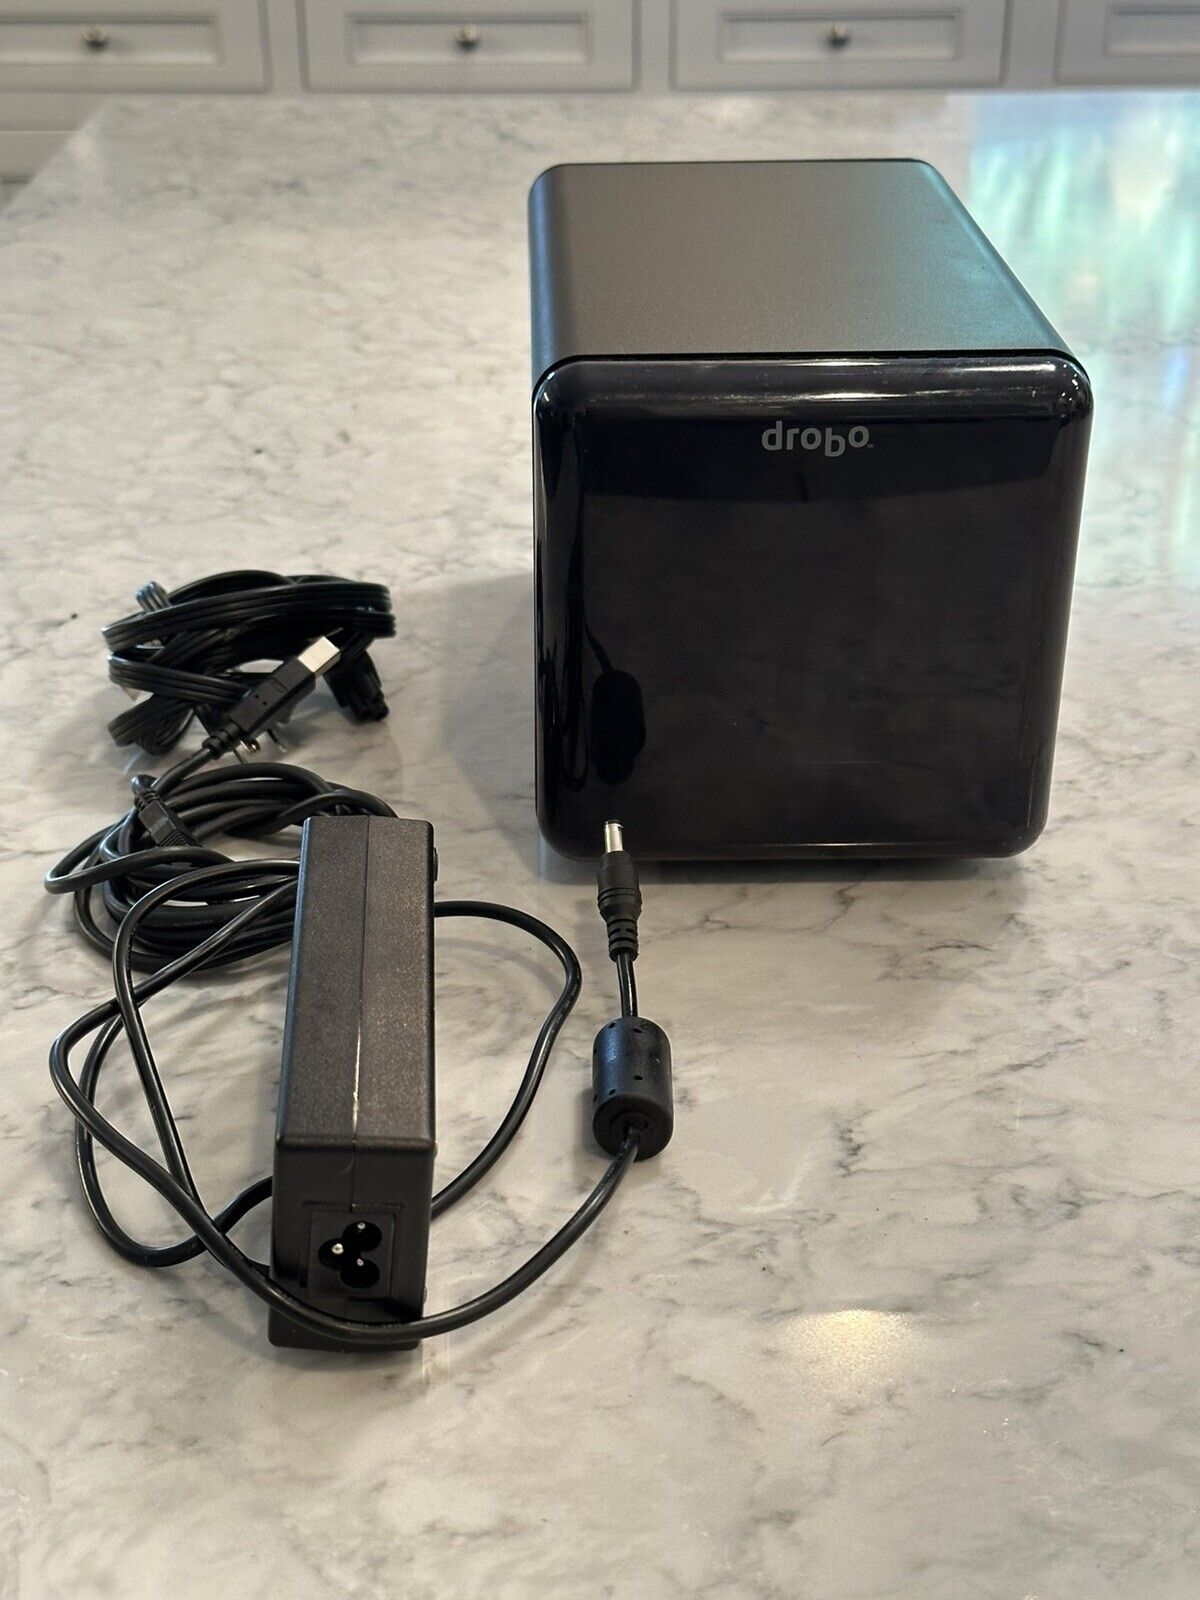 Drobo DRO4D-D 4-Bay DAS Storage Array with 9TB Drives Included